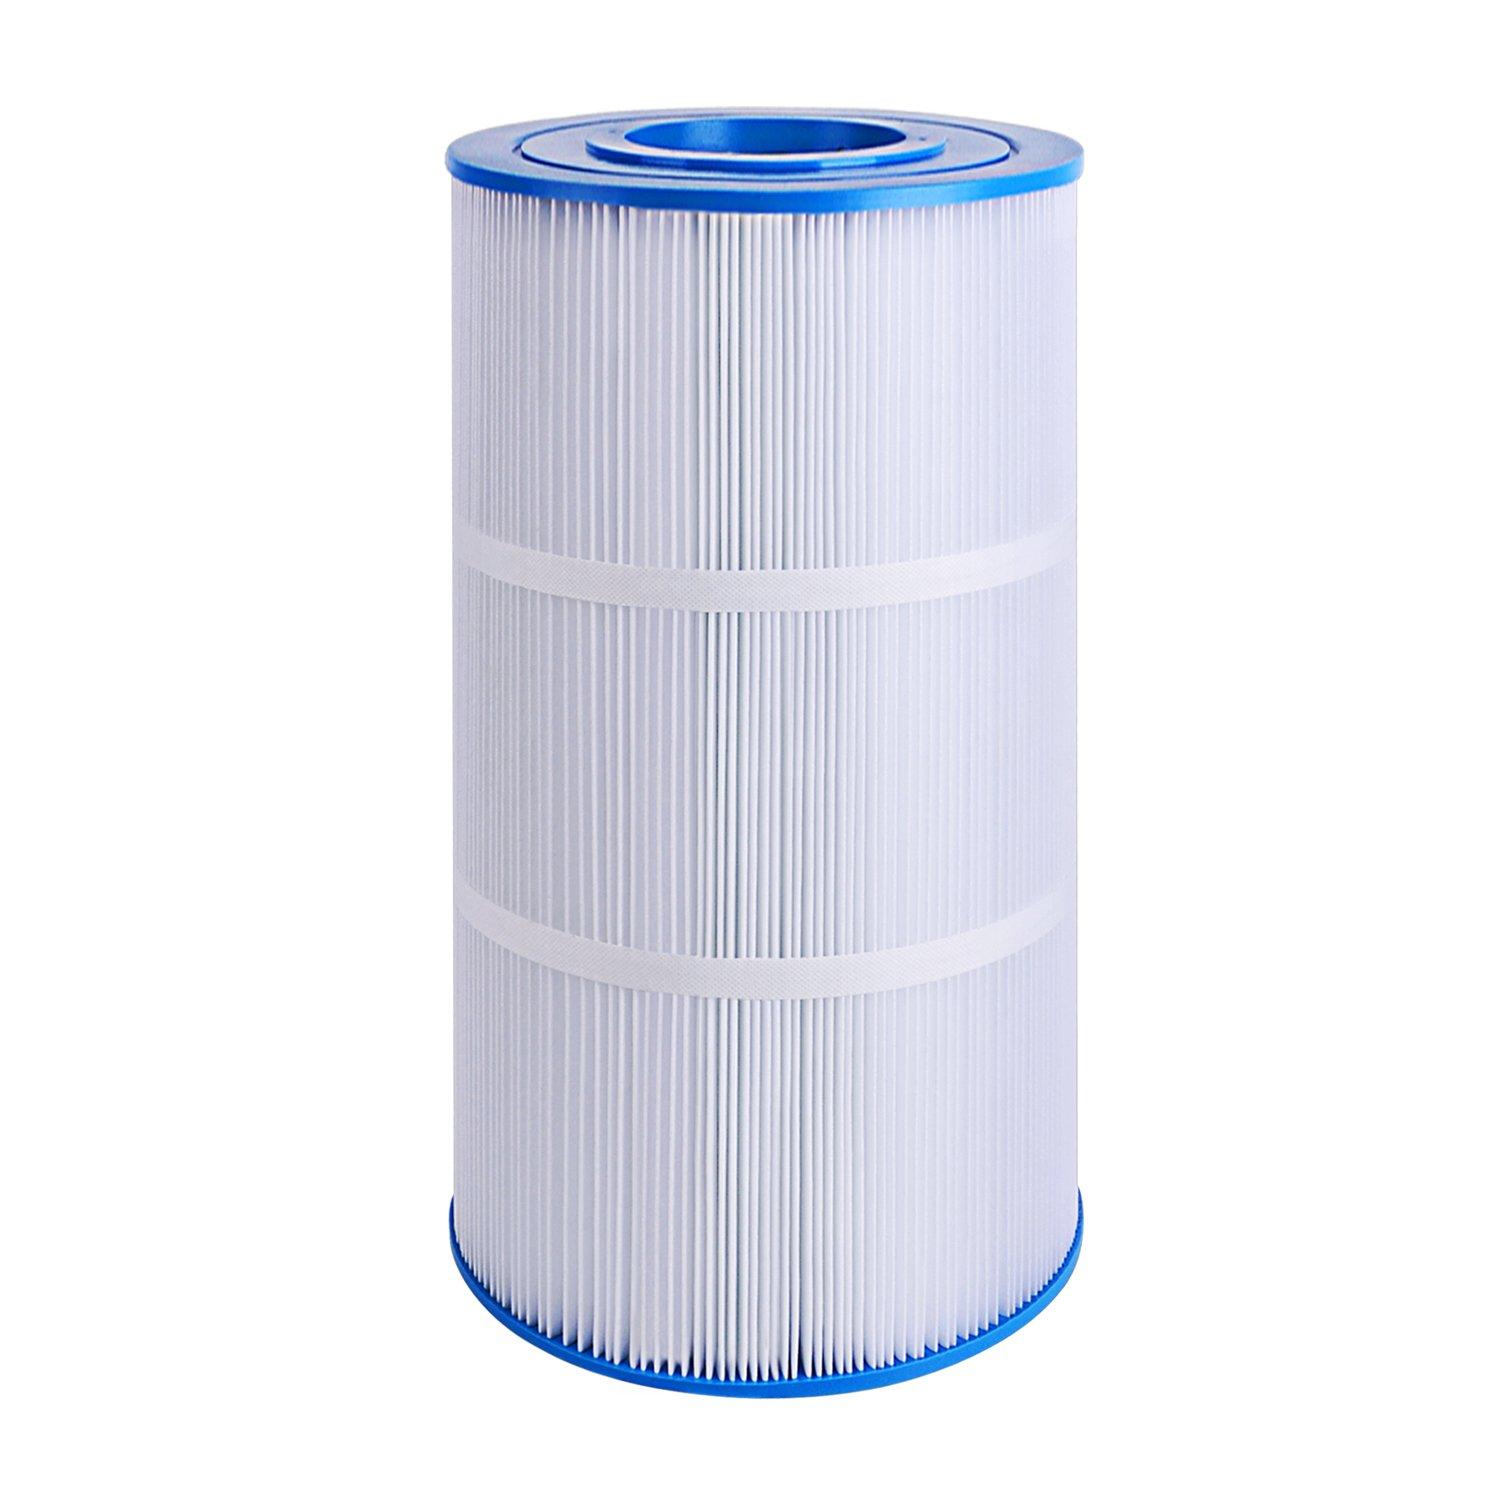 In The Swim  Filter Cartridge Replacement for Hayward Star-Clear Plus C900 C751